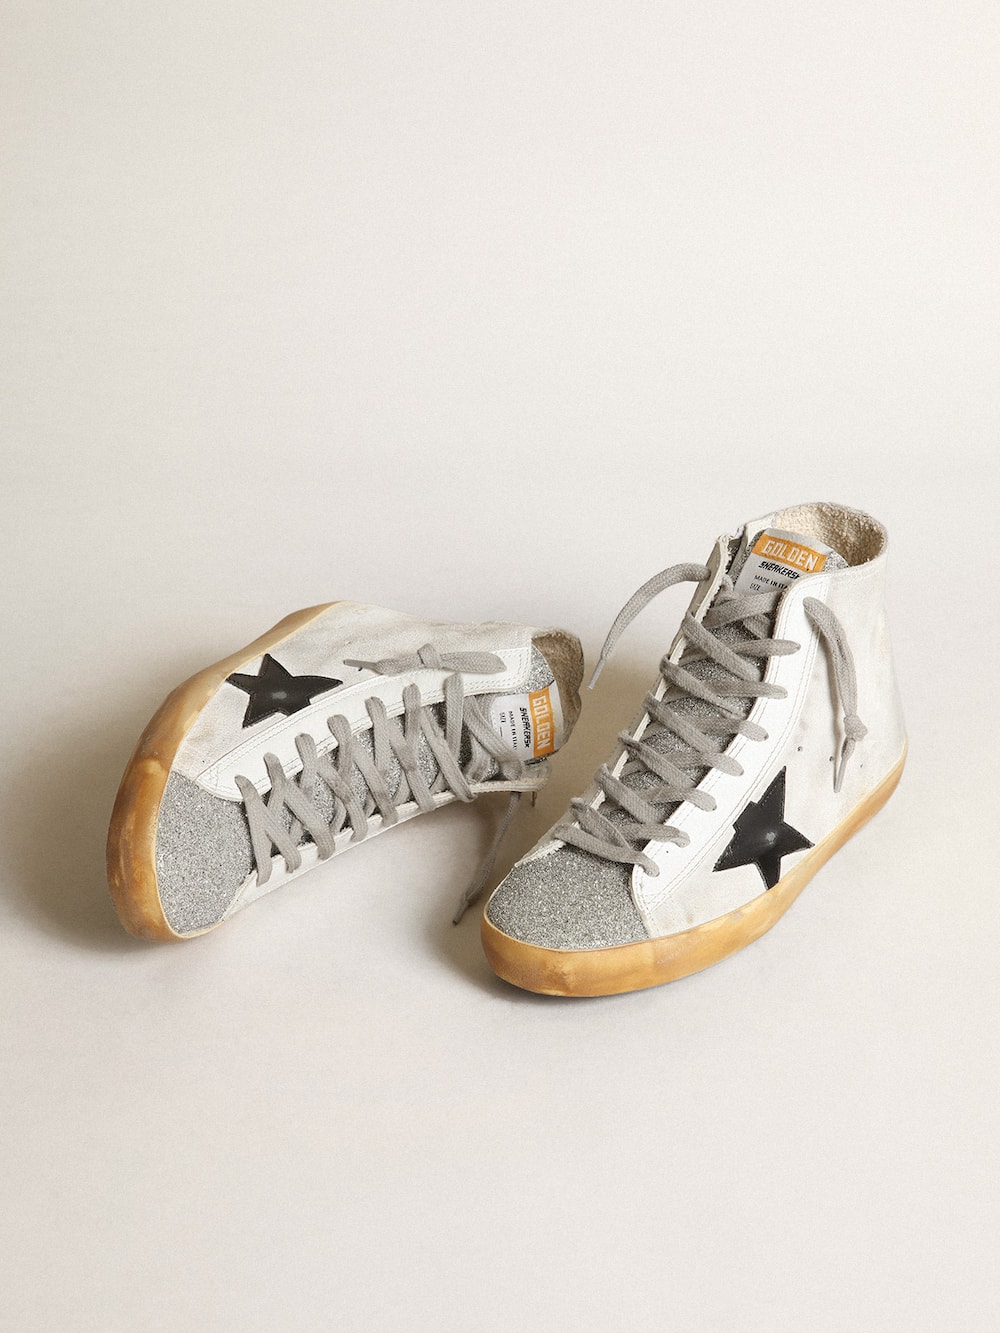 Golden Goose - Women’s Francy in white suede with black leather star in 